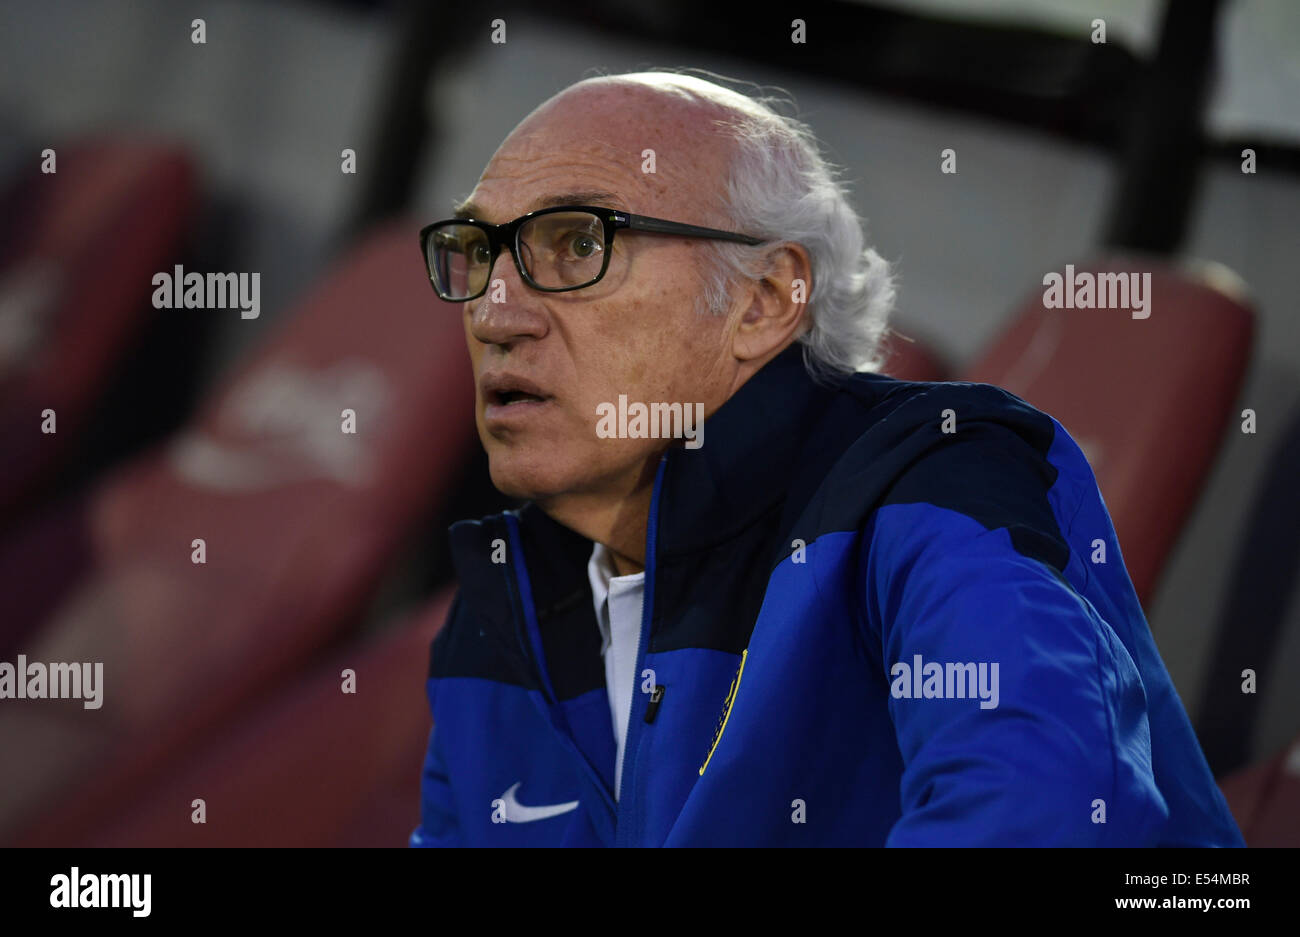 Montevideo, Uruguay. 20th July, 2014. Head coach Carlos Bianchi of Argentina's Boca Juniors reacts during a friendly match against Uruguay's Nacional at the Centenario Stadium in Montevideo, capital of Uruguay, on July 20, 2014. © Nicolas Celaya/Xinhua/Alamy Live News Stock Photo